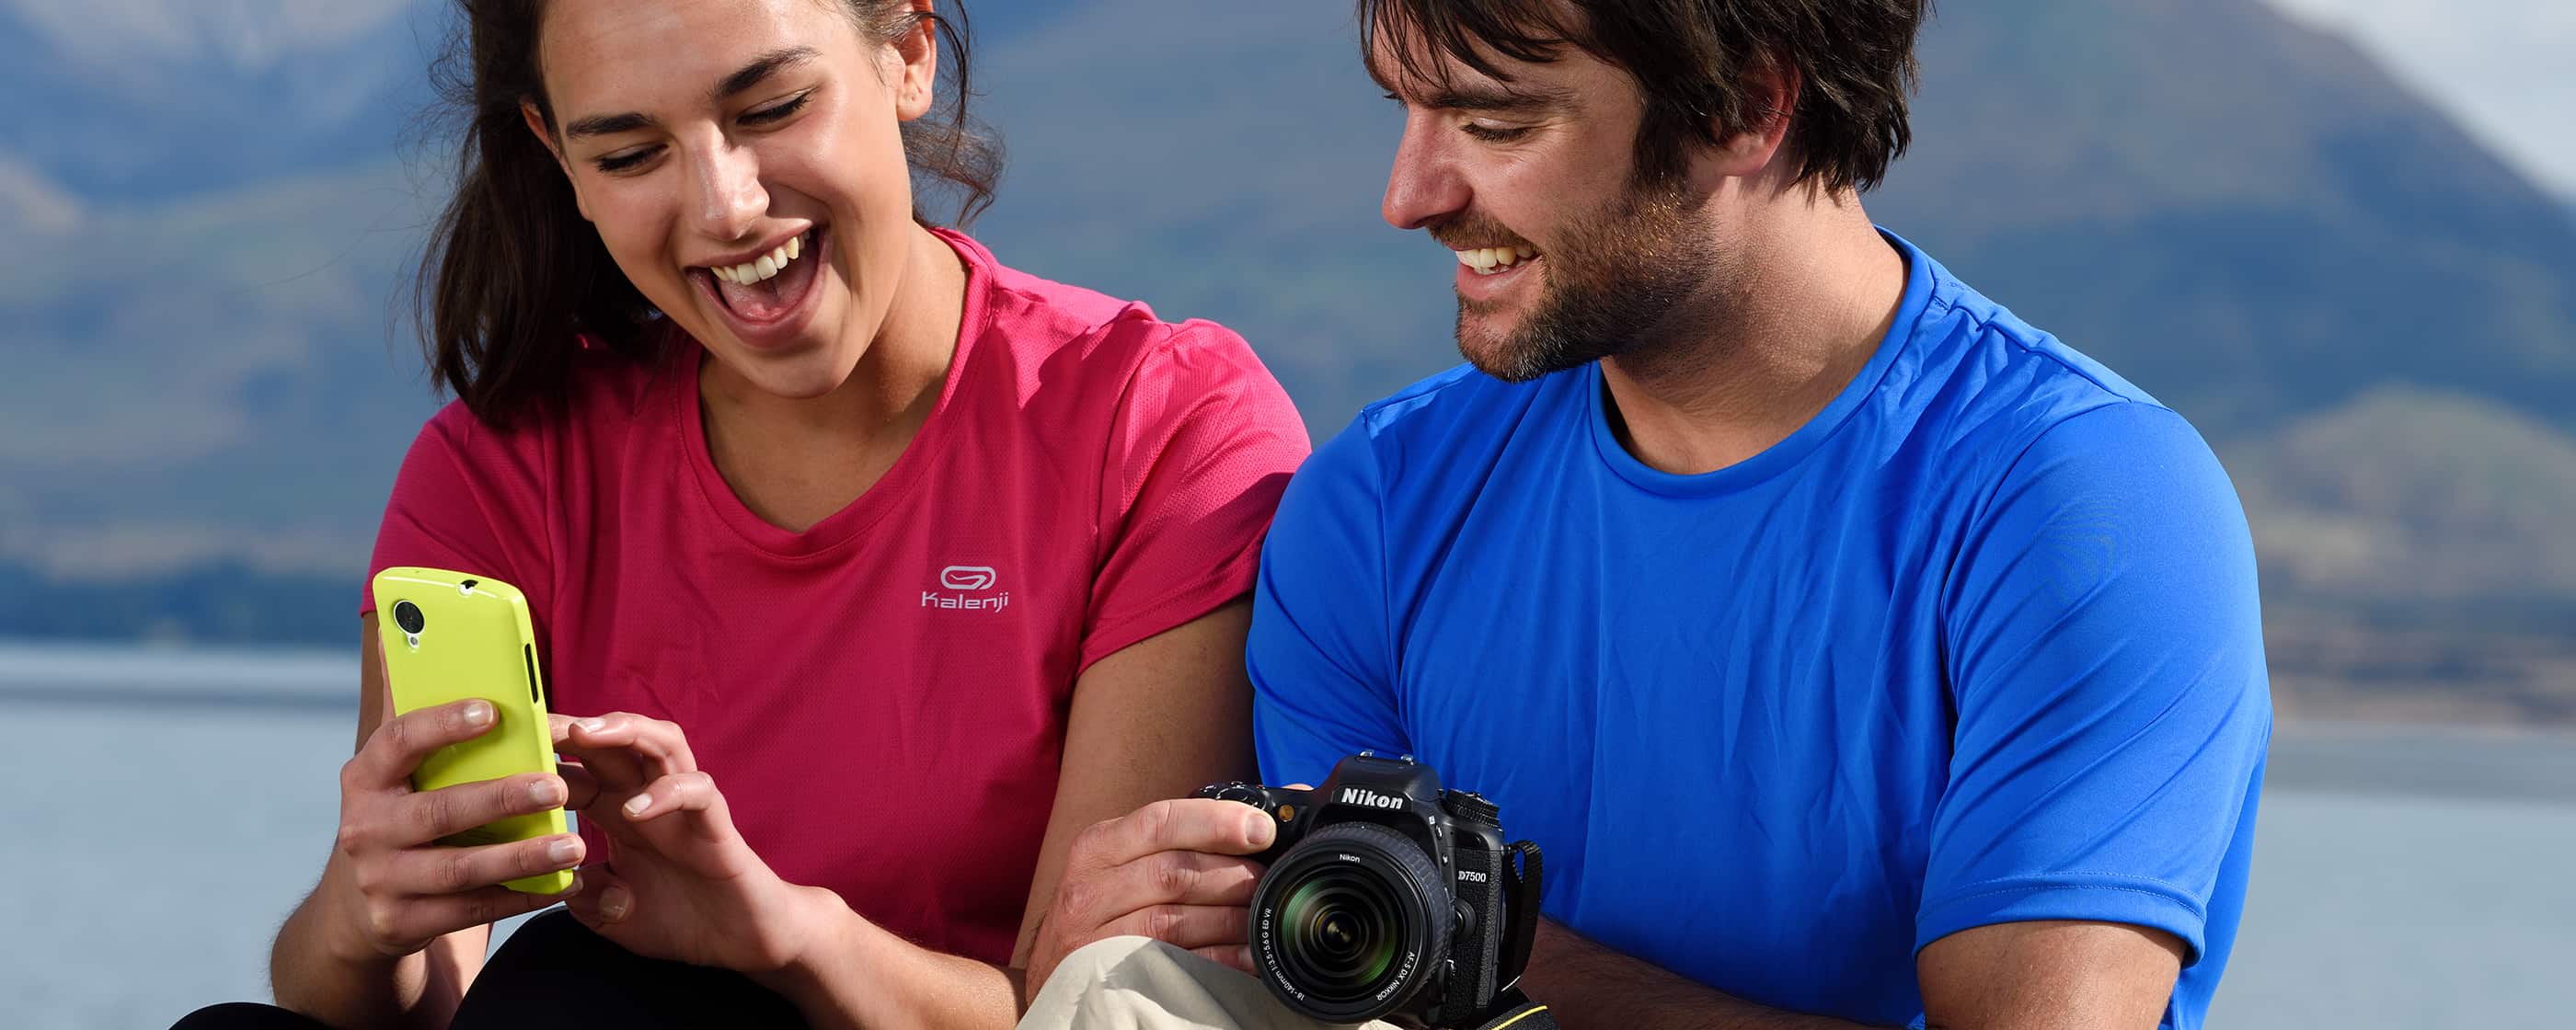 photo of a woman holding a smartphone and a man holding the D7500